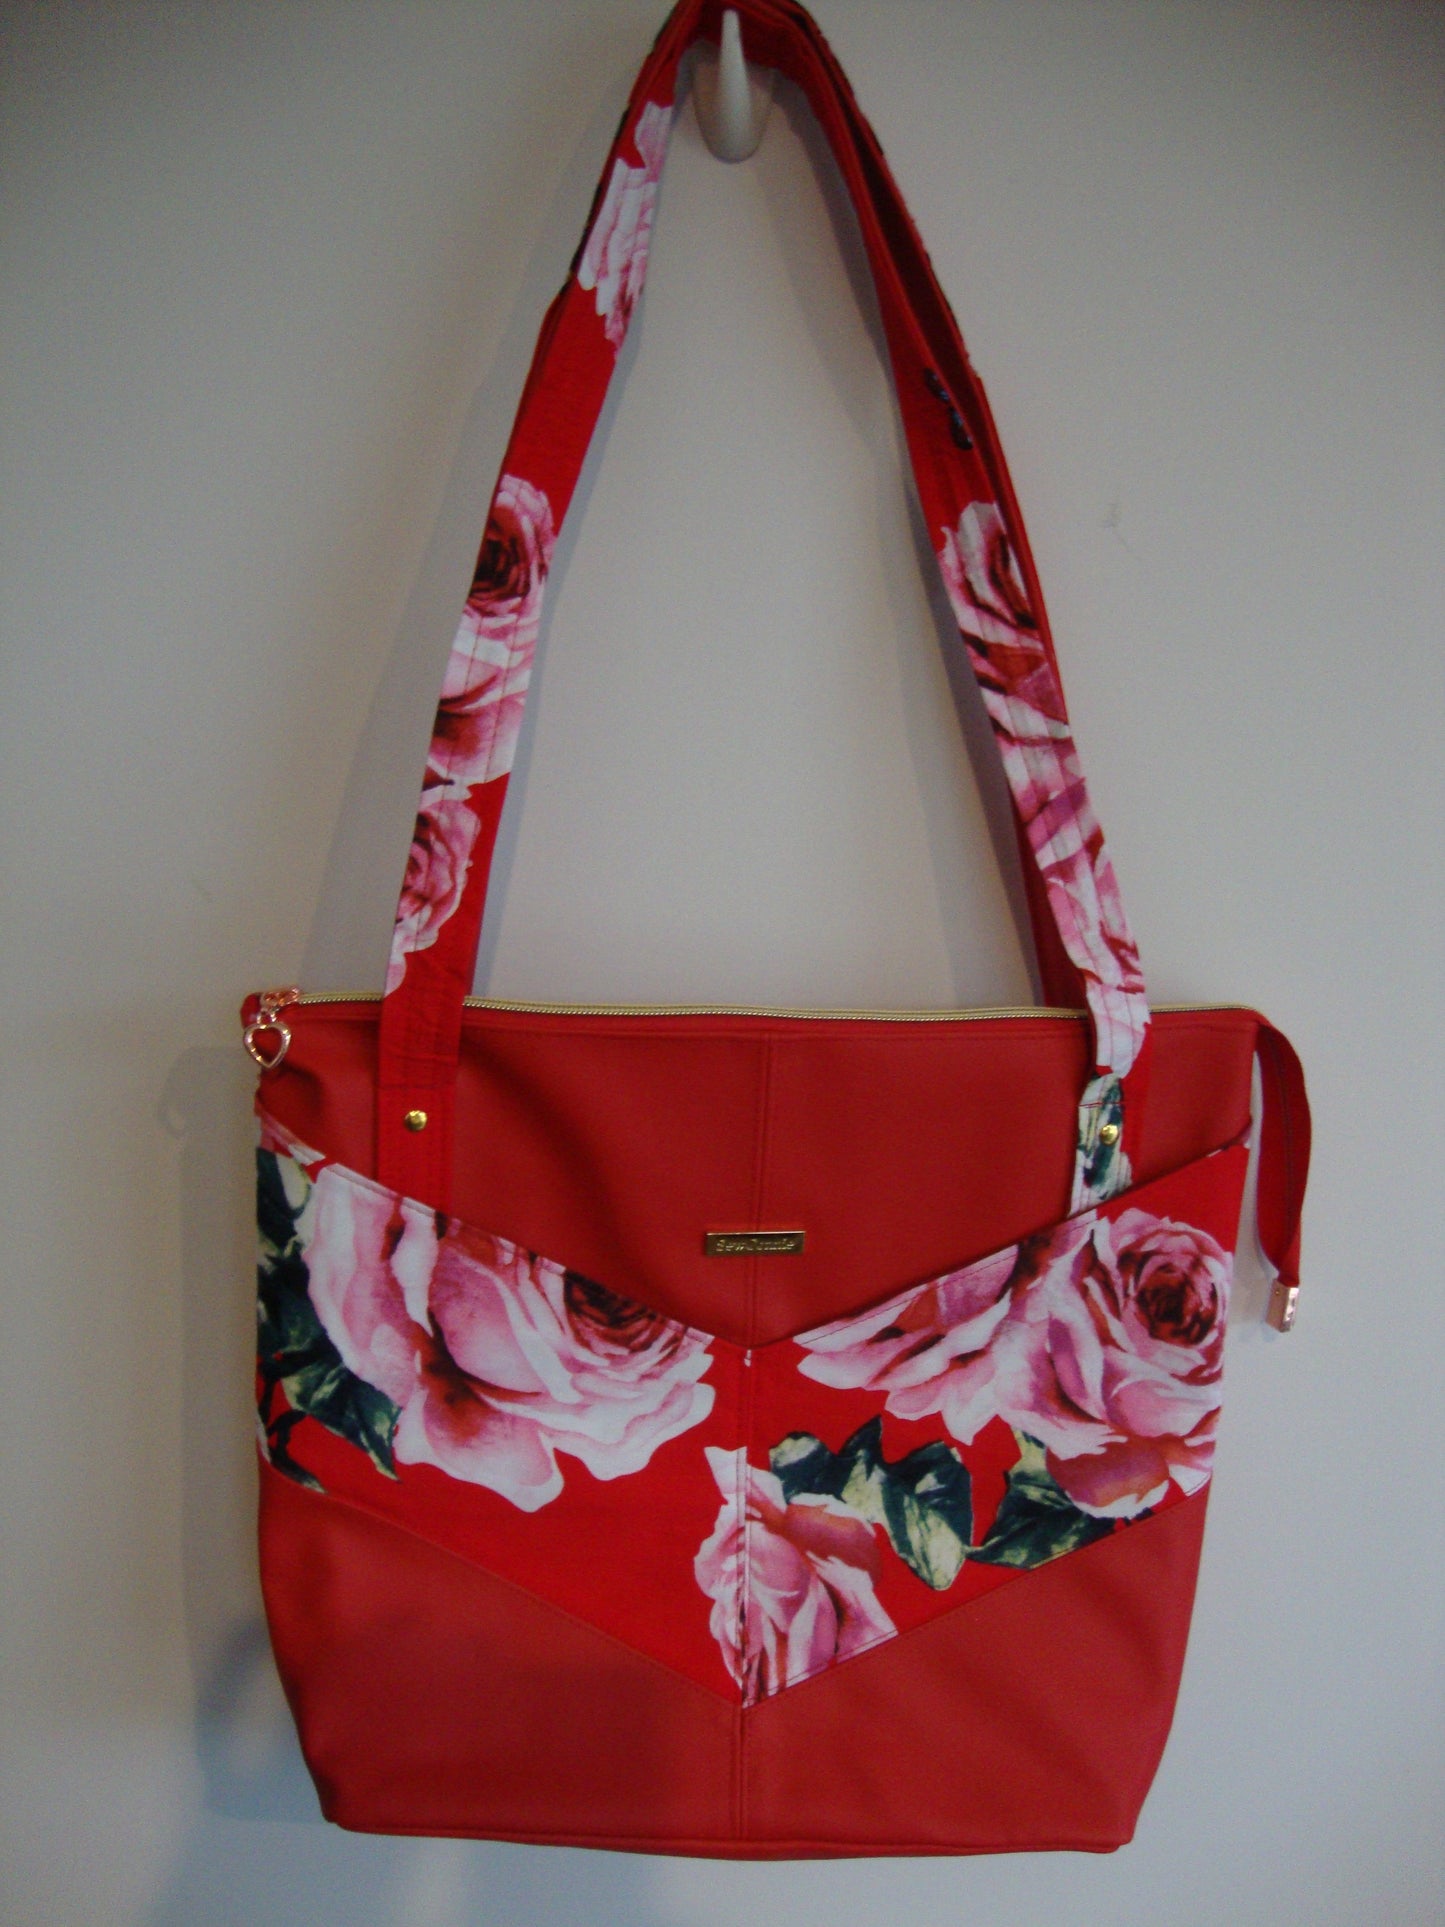 Red and Pink roses with Red Vinyl Tote Bag